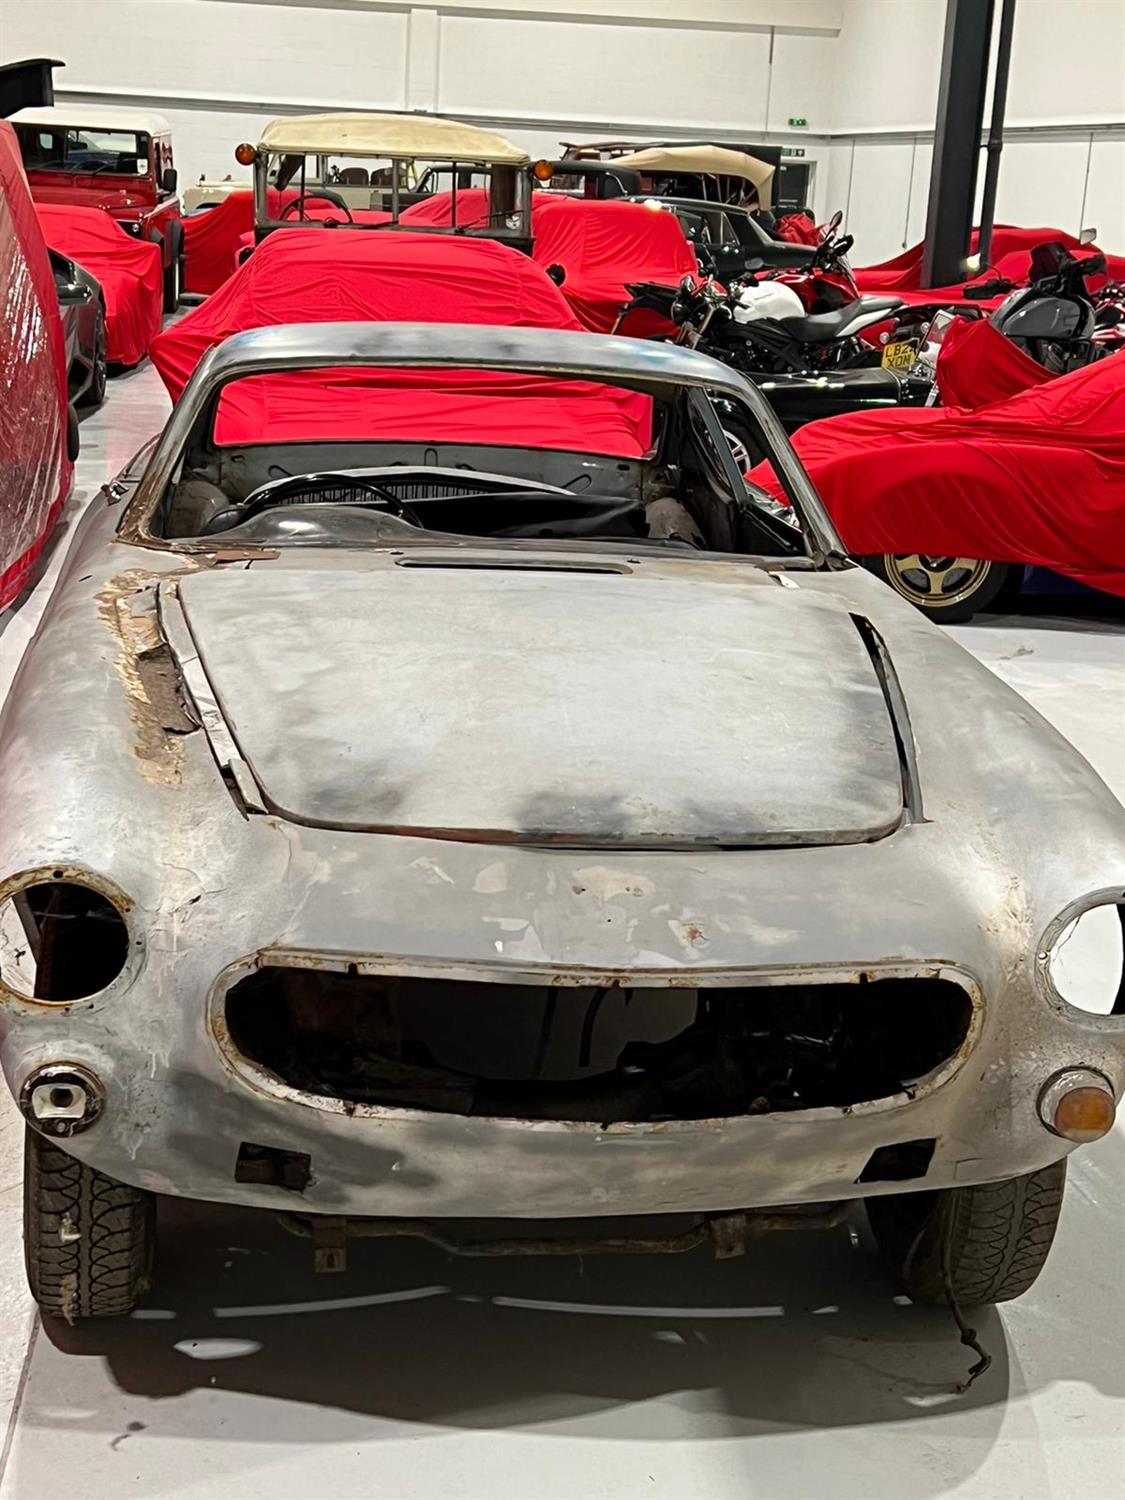 1971 Volvo P1800 Project - Image 2 of 3